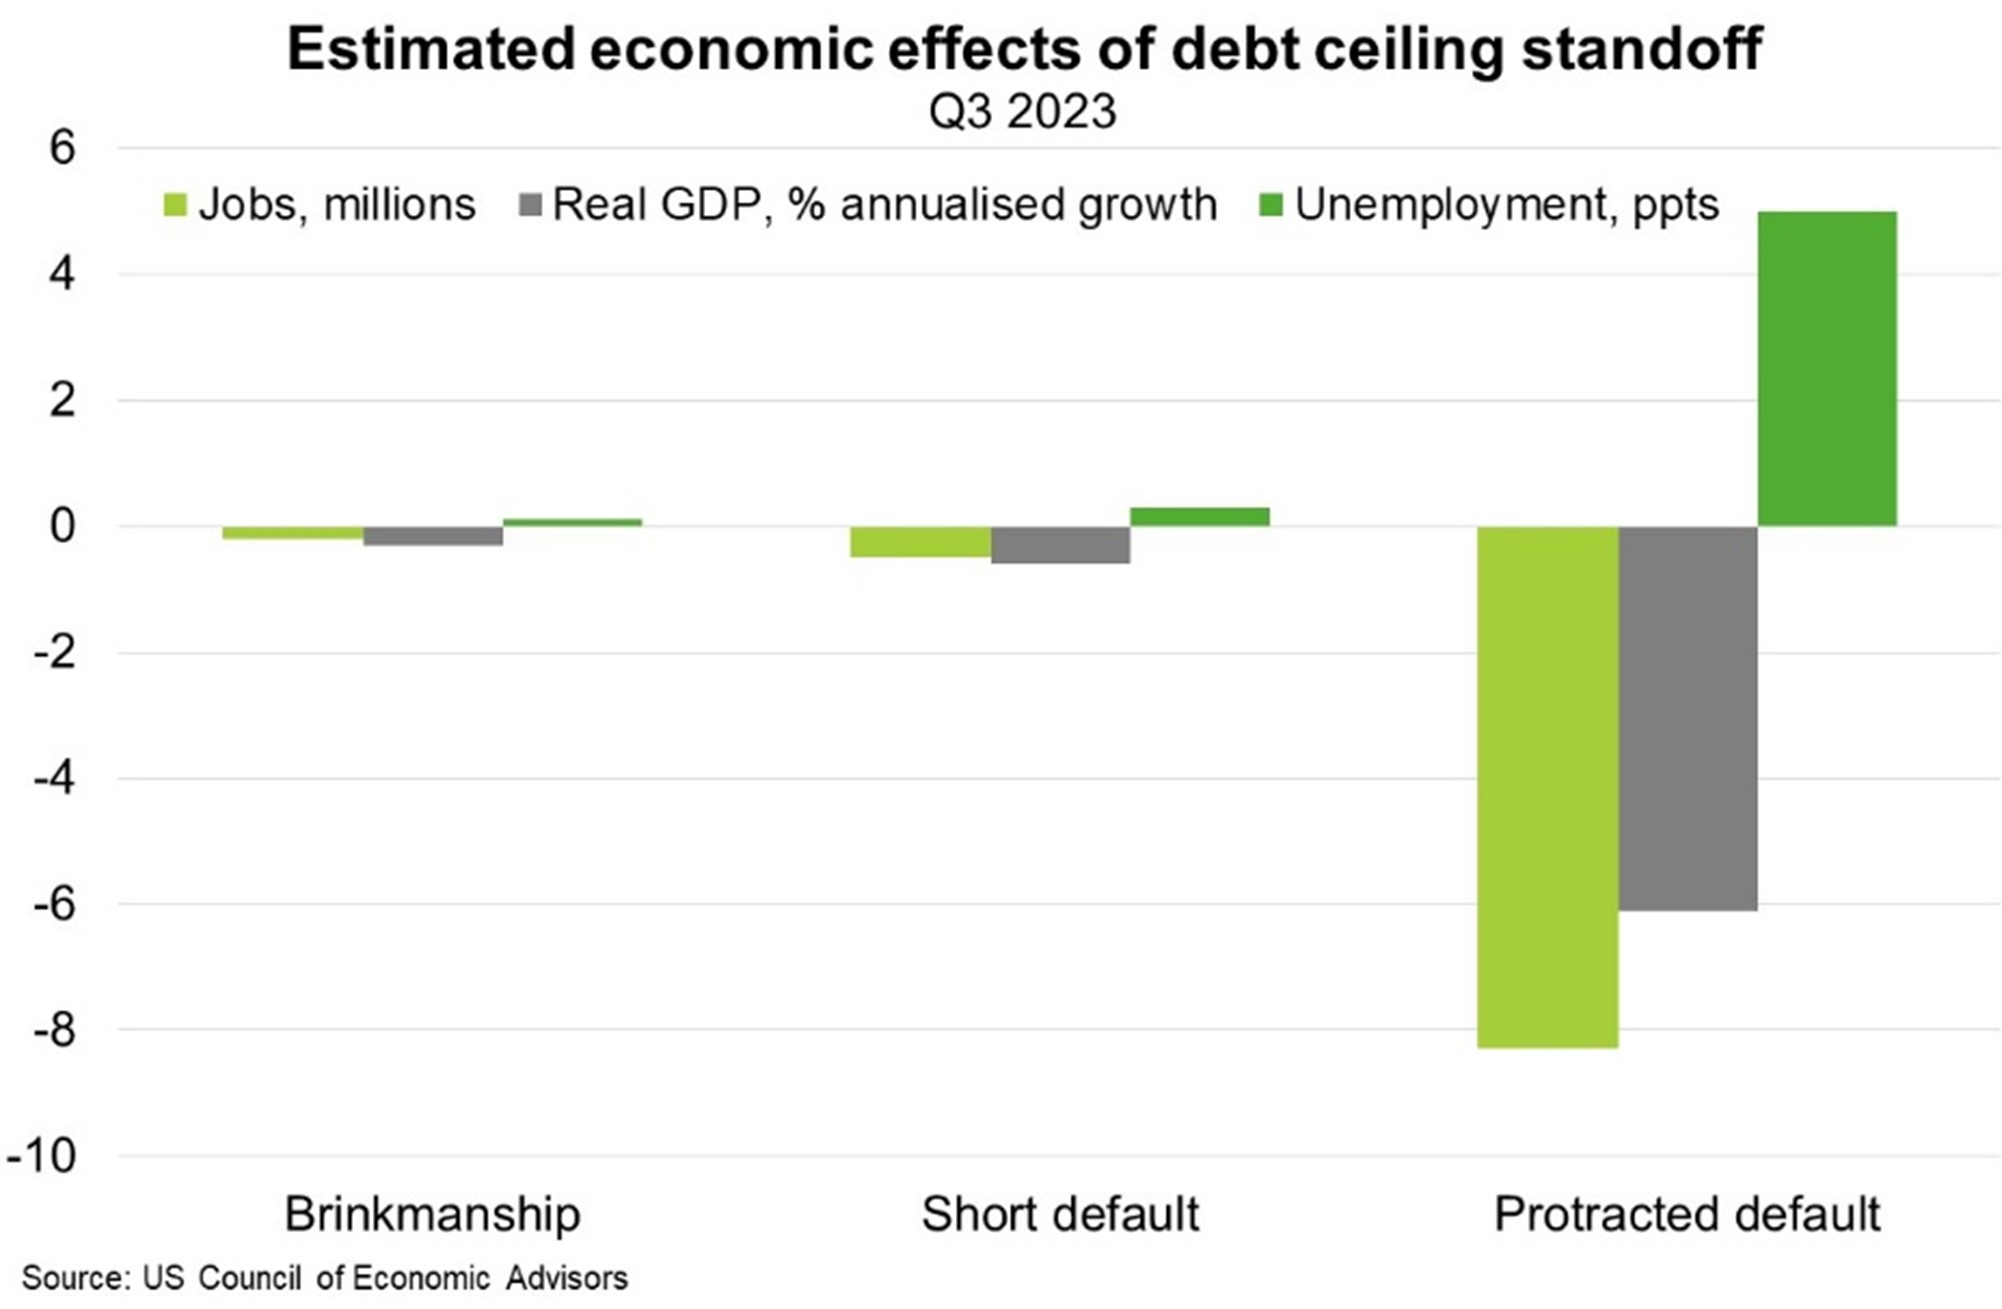 In the first full quarter of a simulated debt ceiling breach, the stock market falls 45% and unemployment increases 5 ppts.